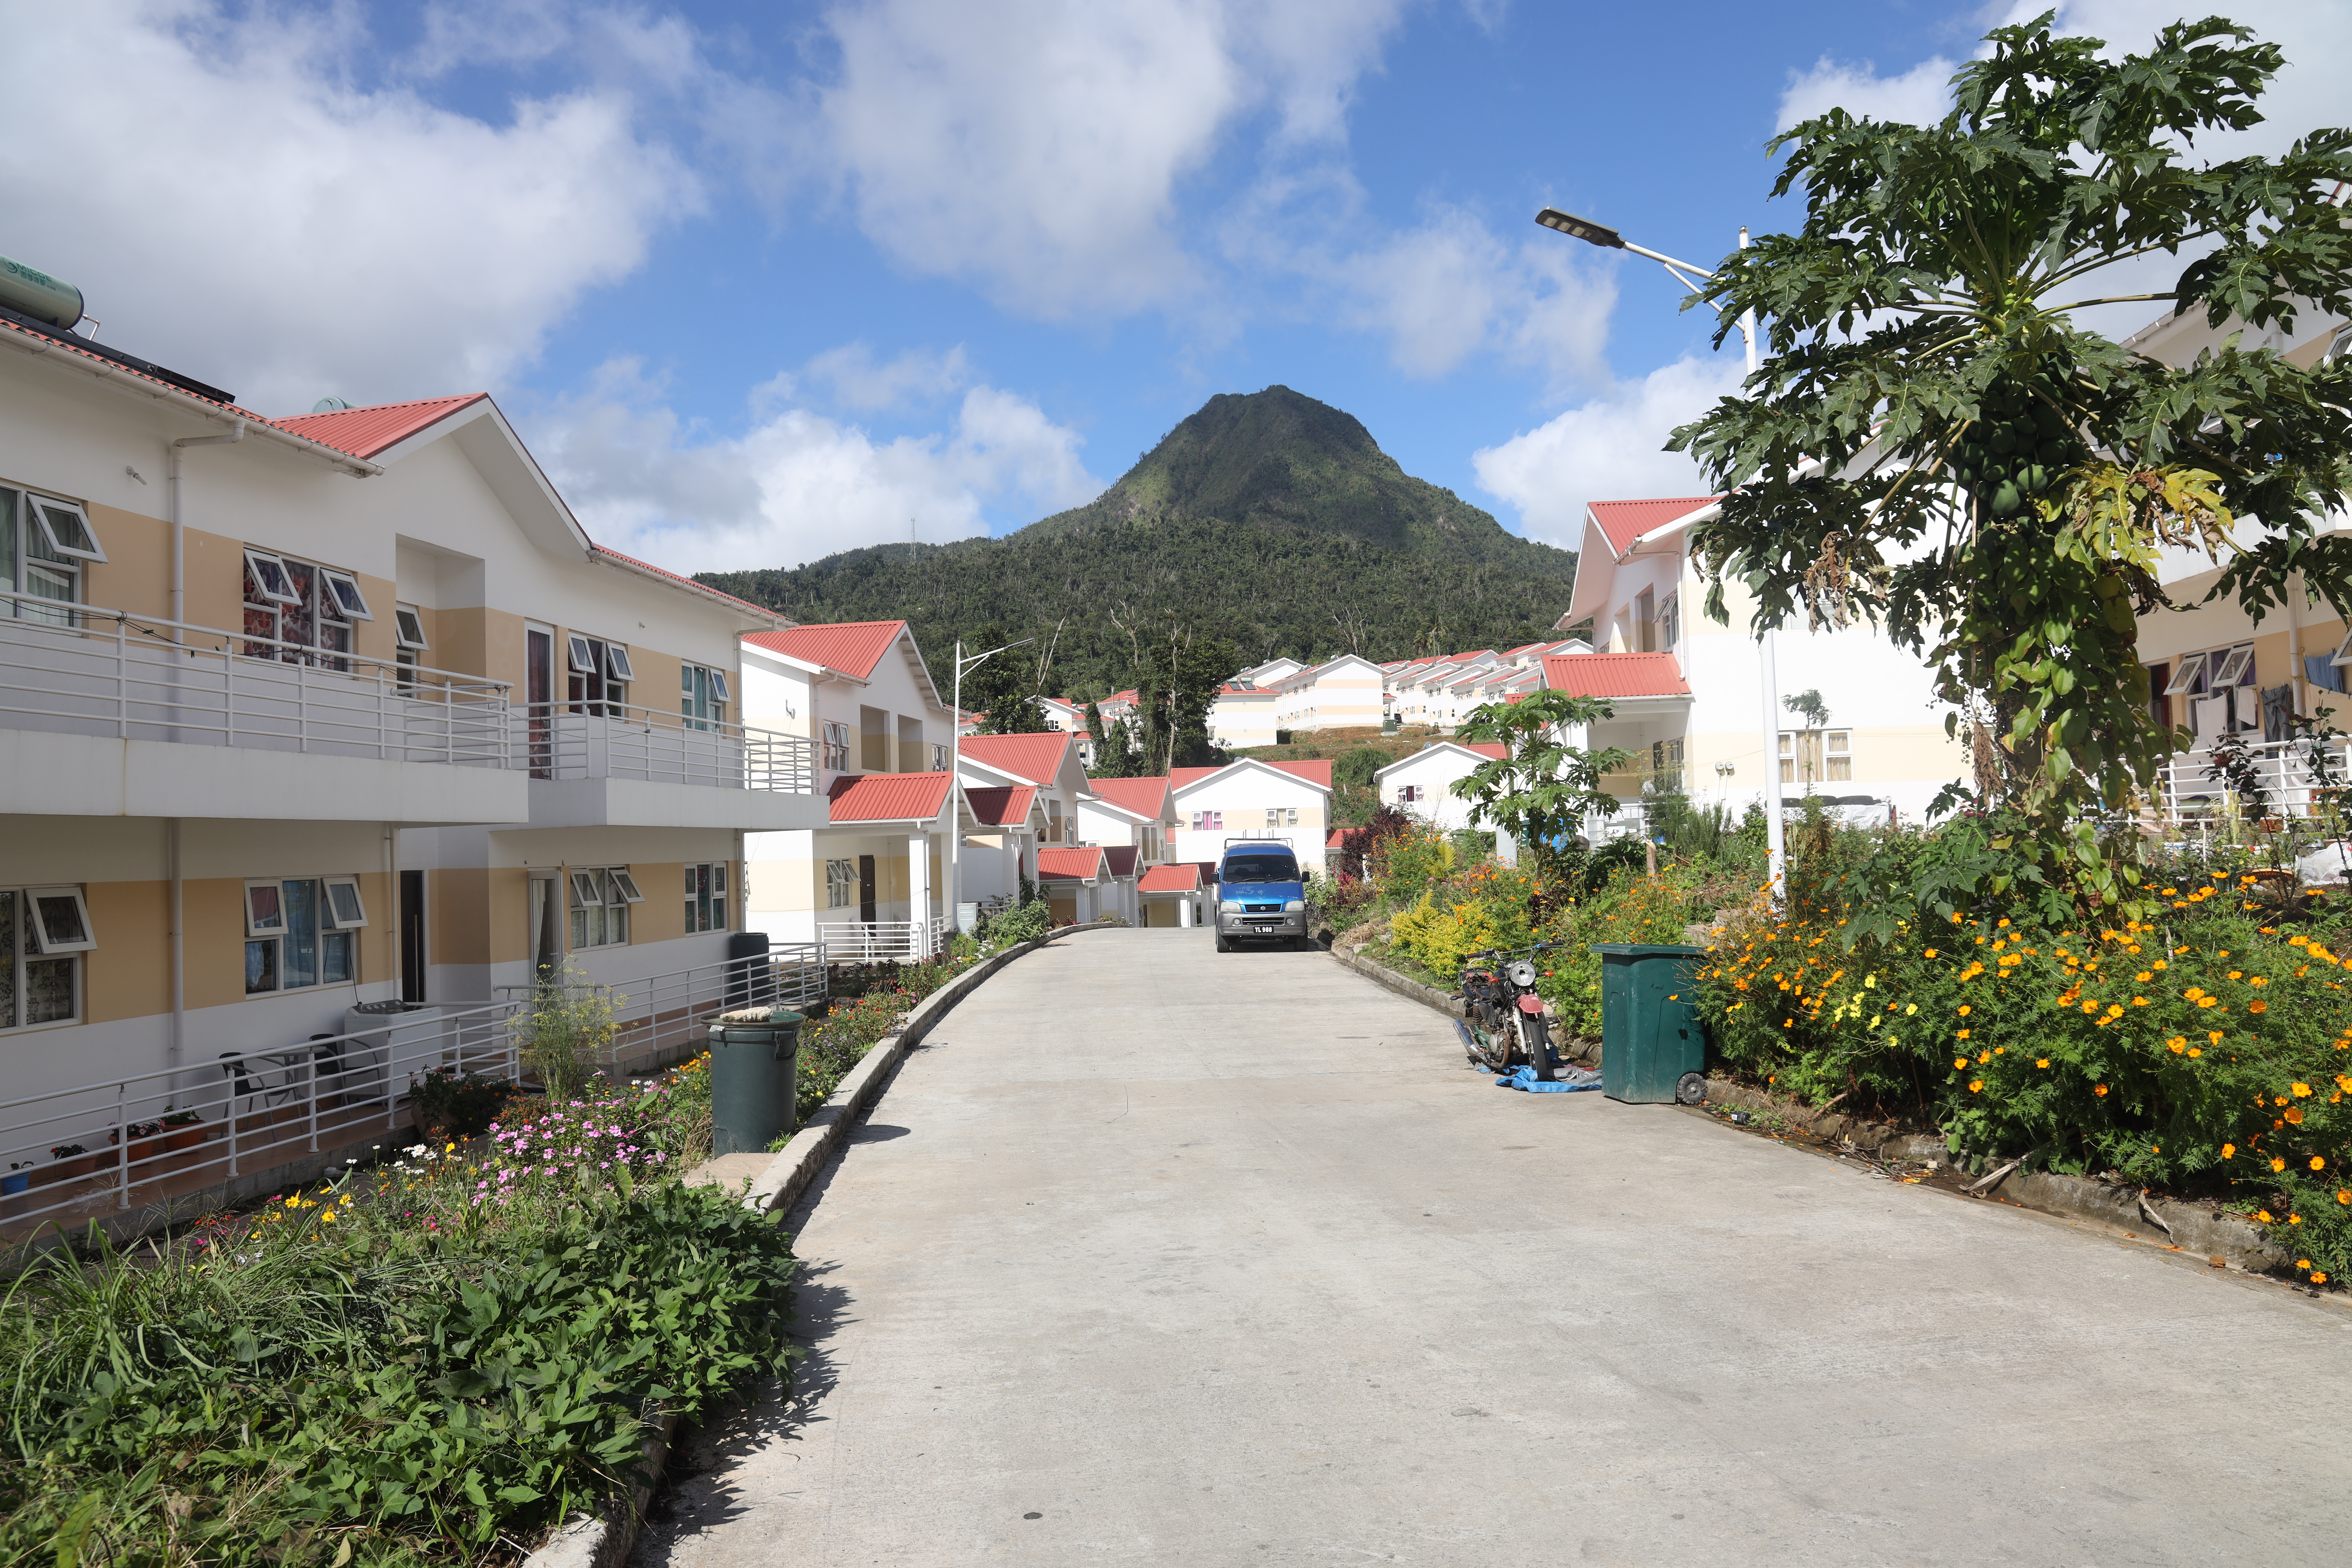 Some 1,000 new homes have been built in Dominica for residents who lost theirs in Tropical Storm Erika in 2015 or Hurricane Maria in 2017.